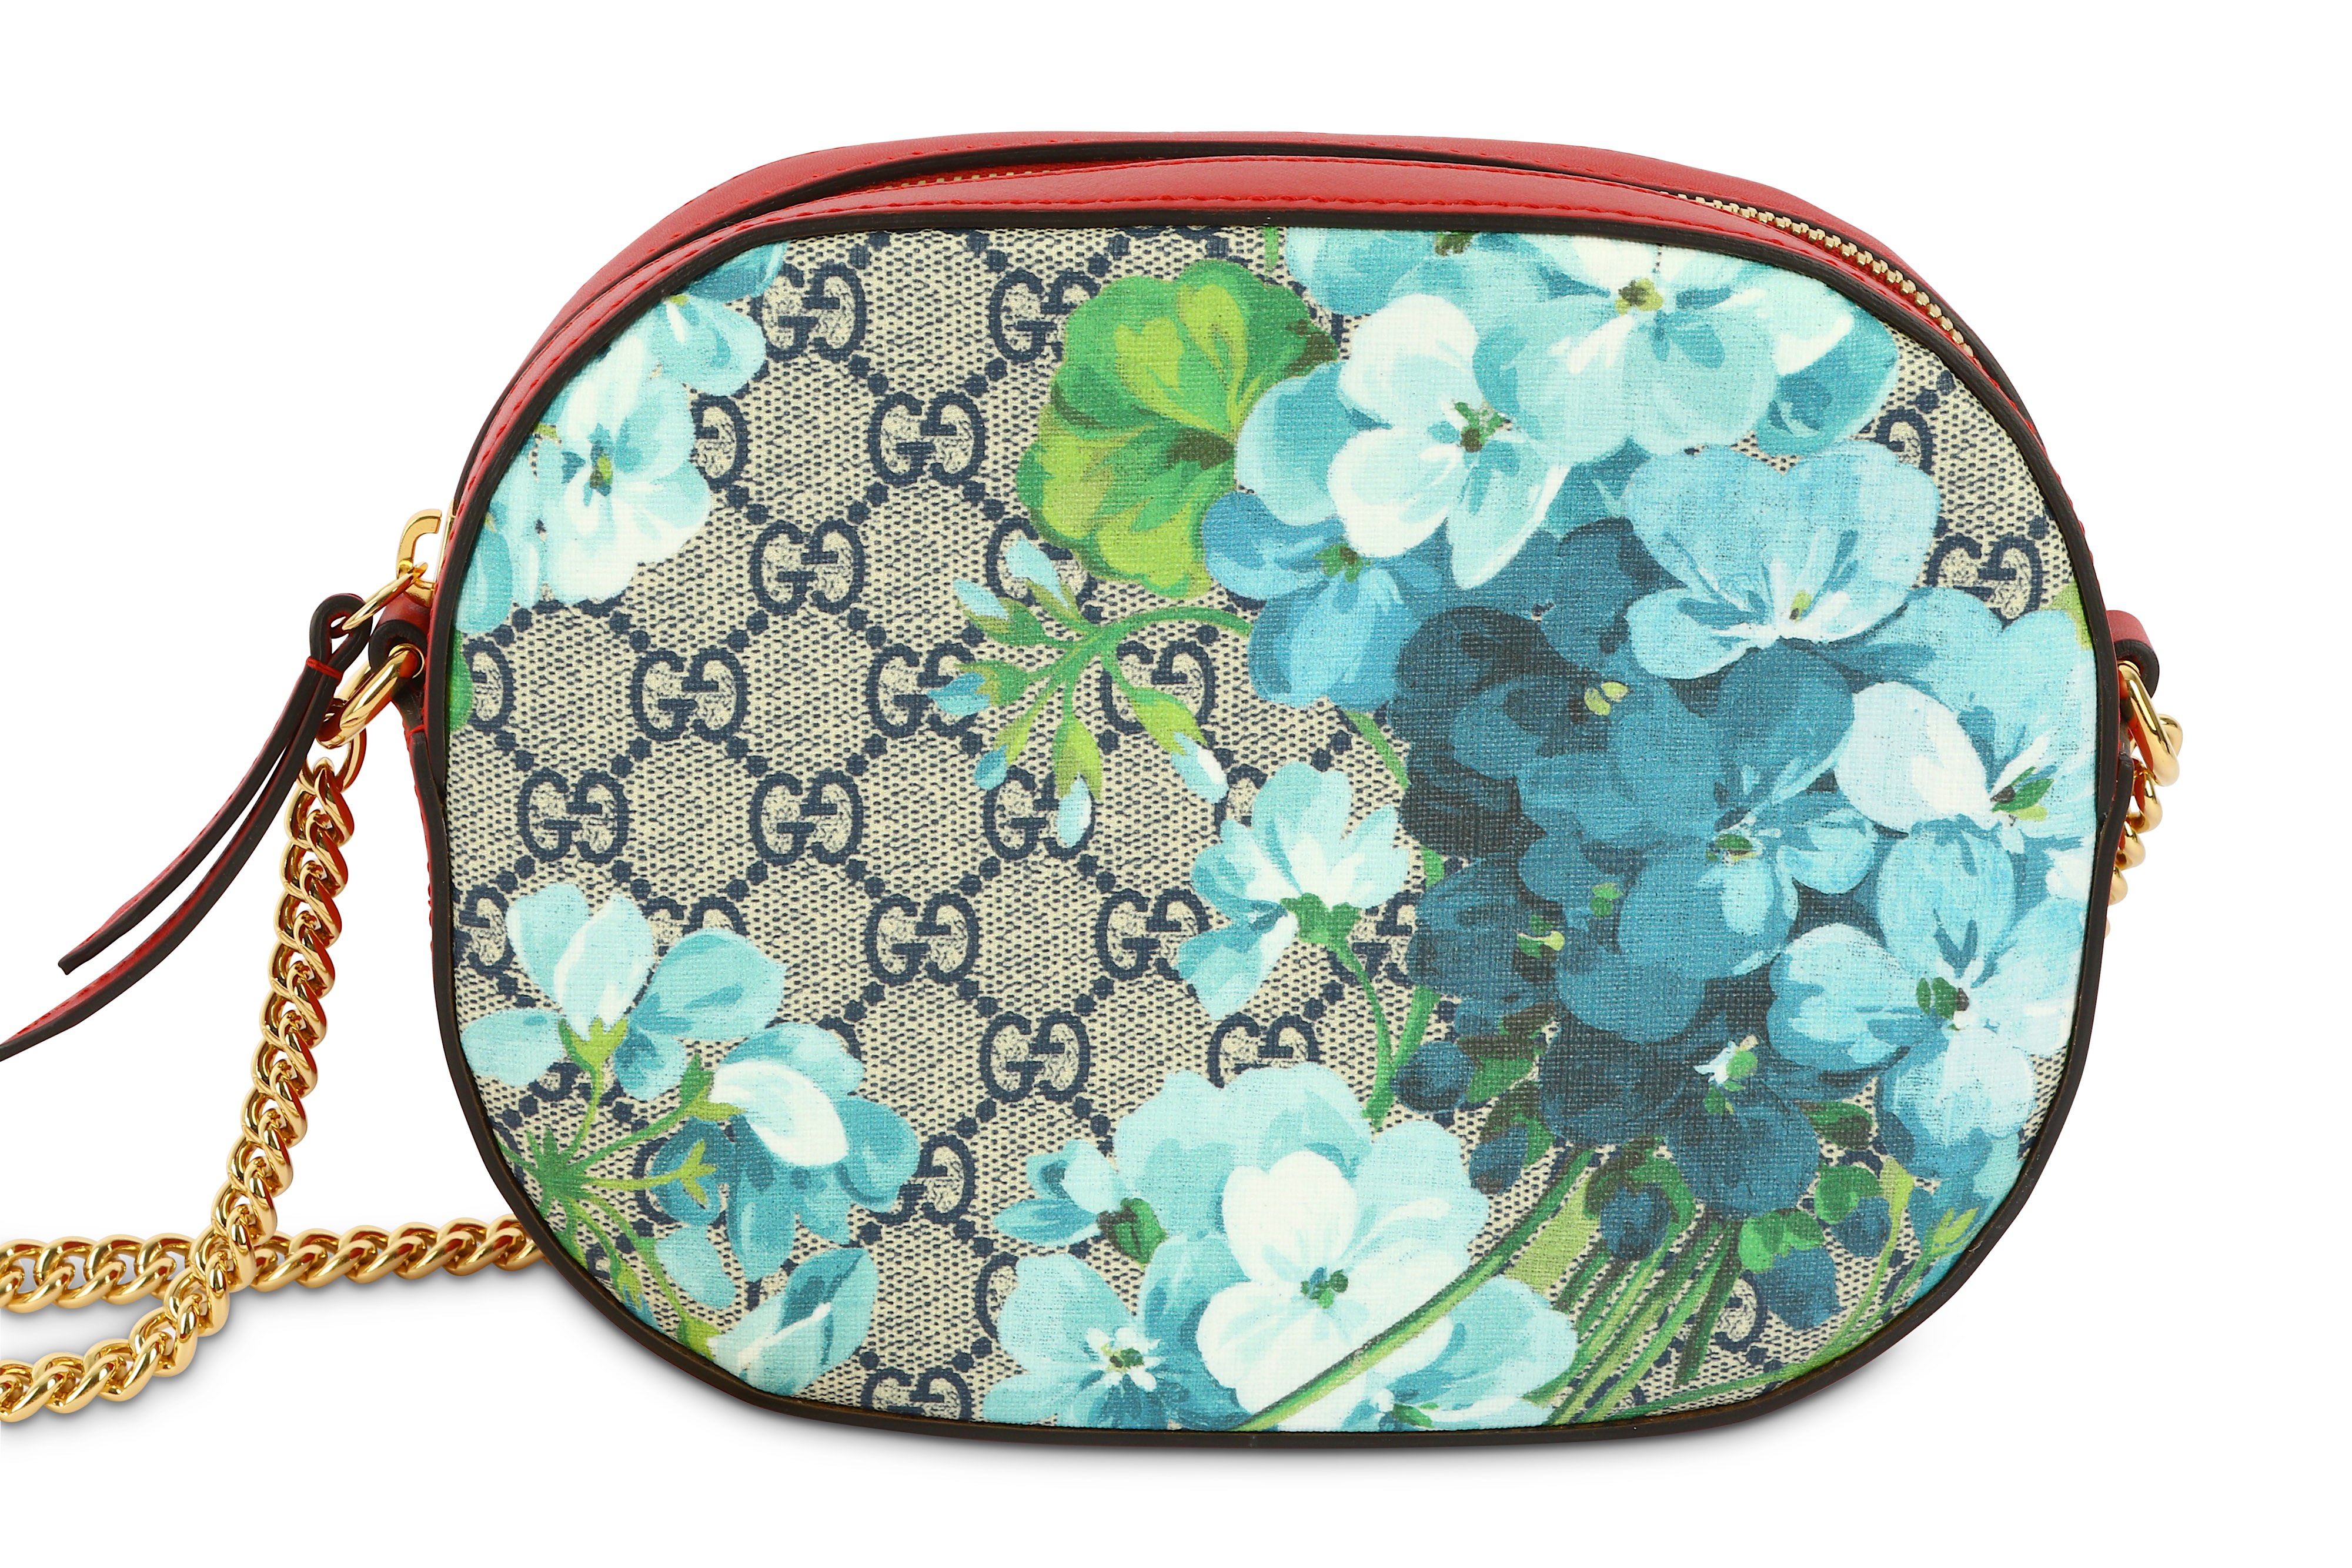 Gucci GG Supreme Blooms Crossbody - Image 2 of 7